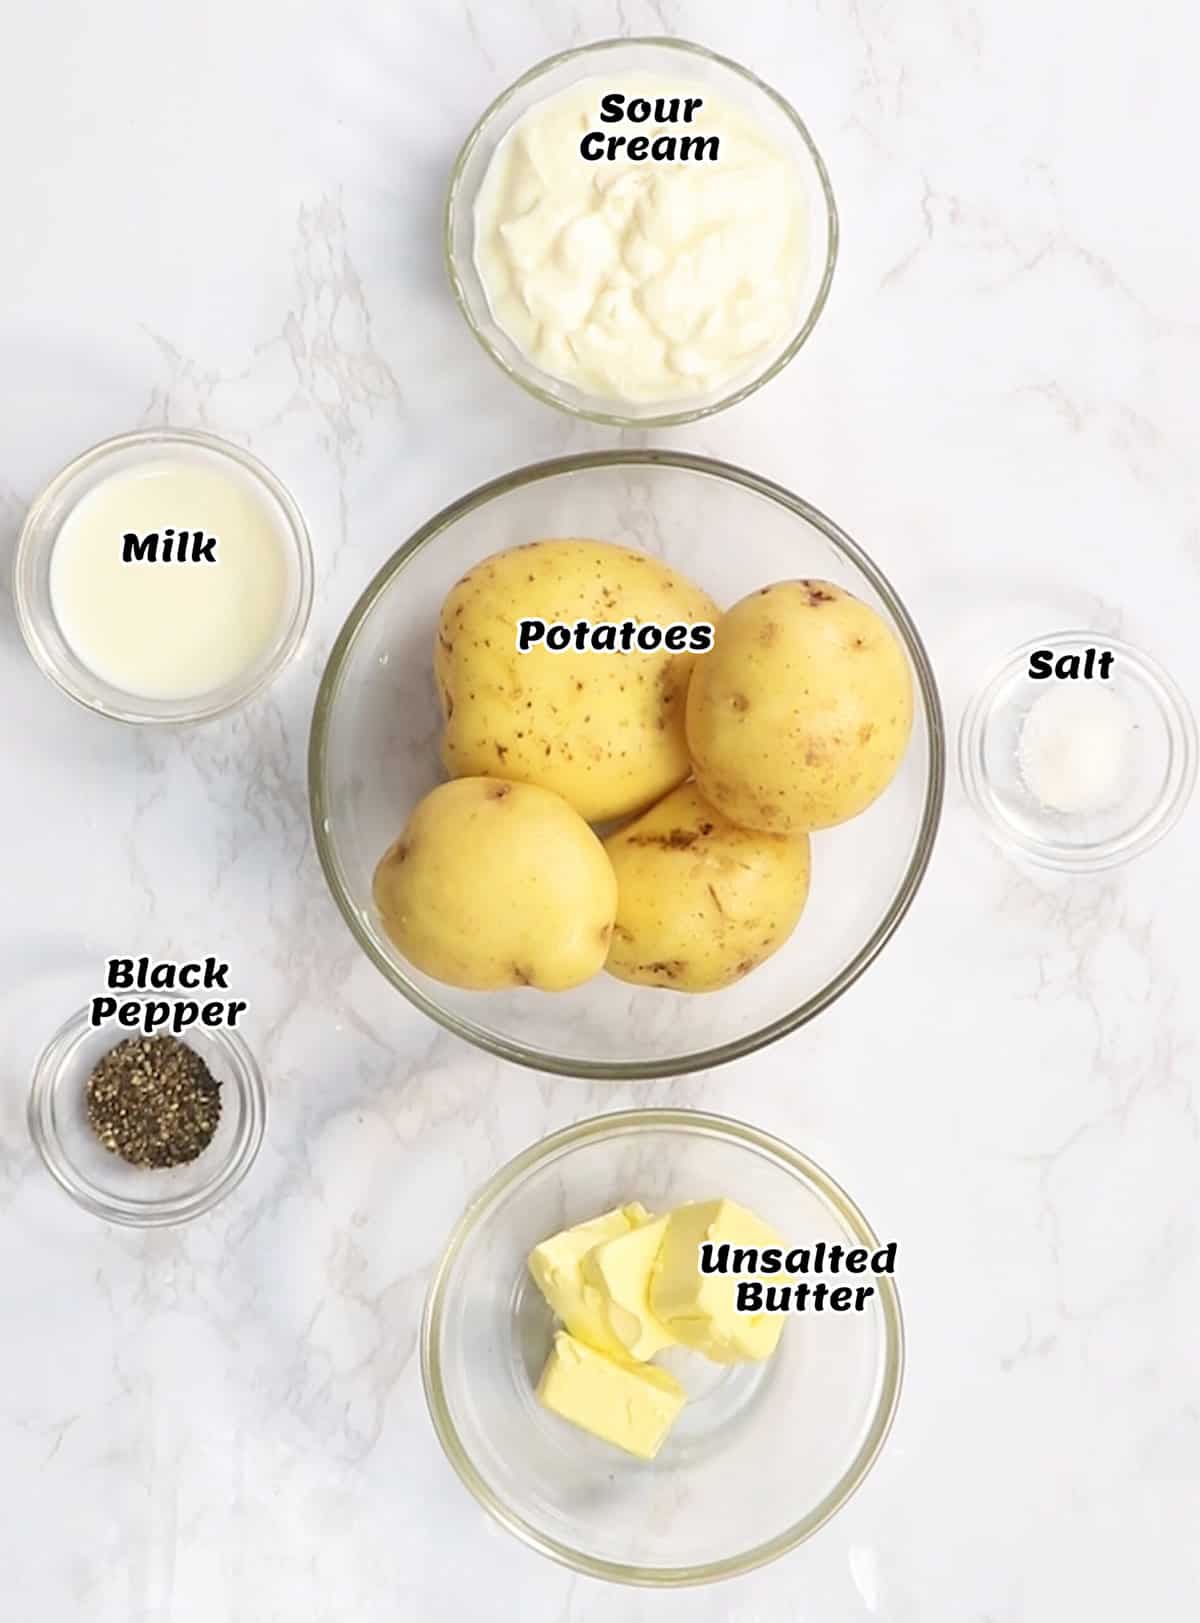 Ingredients you need to make the mashed potato topping